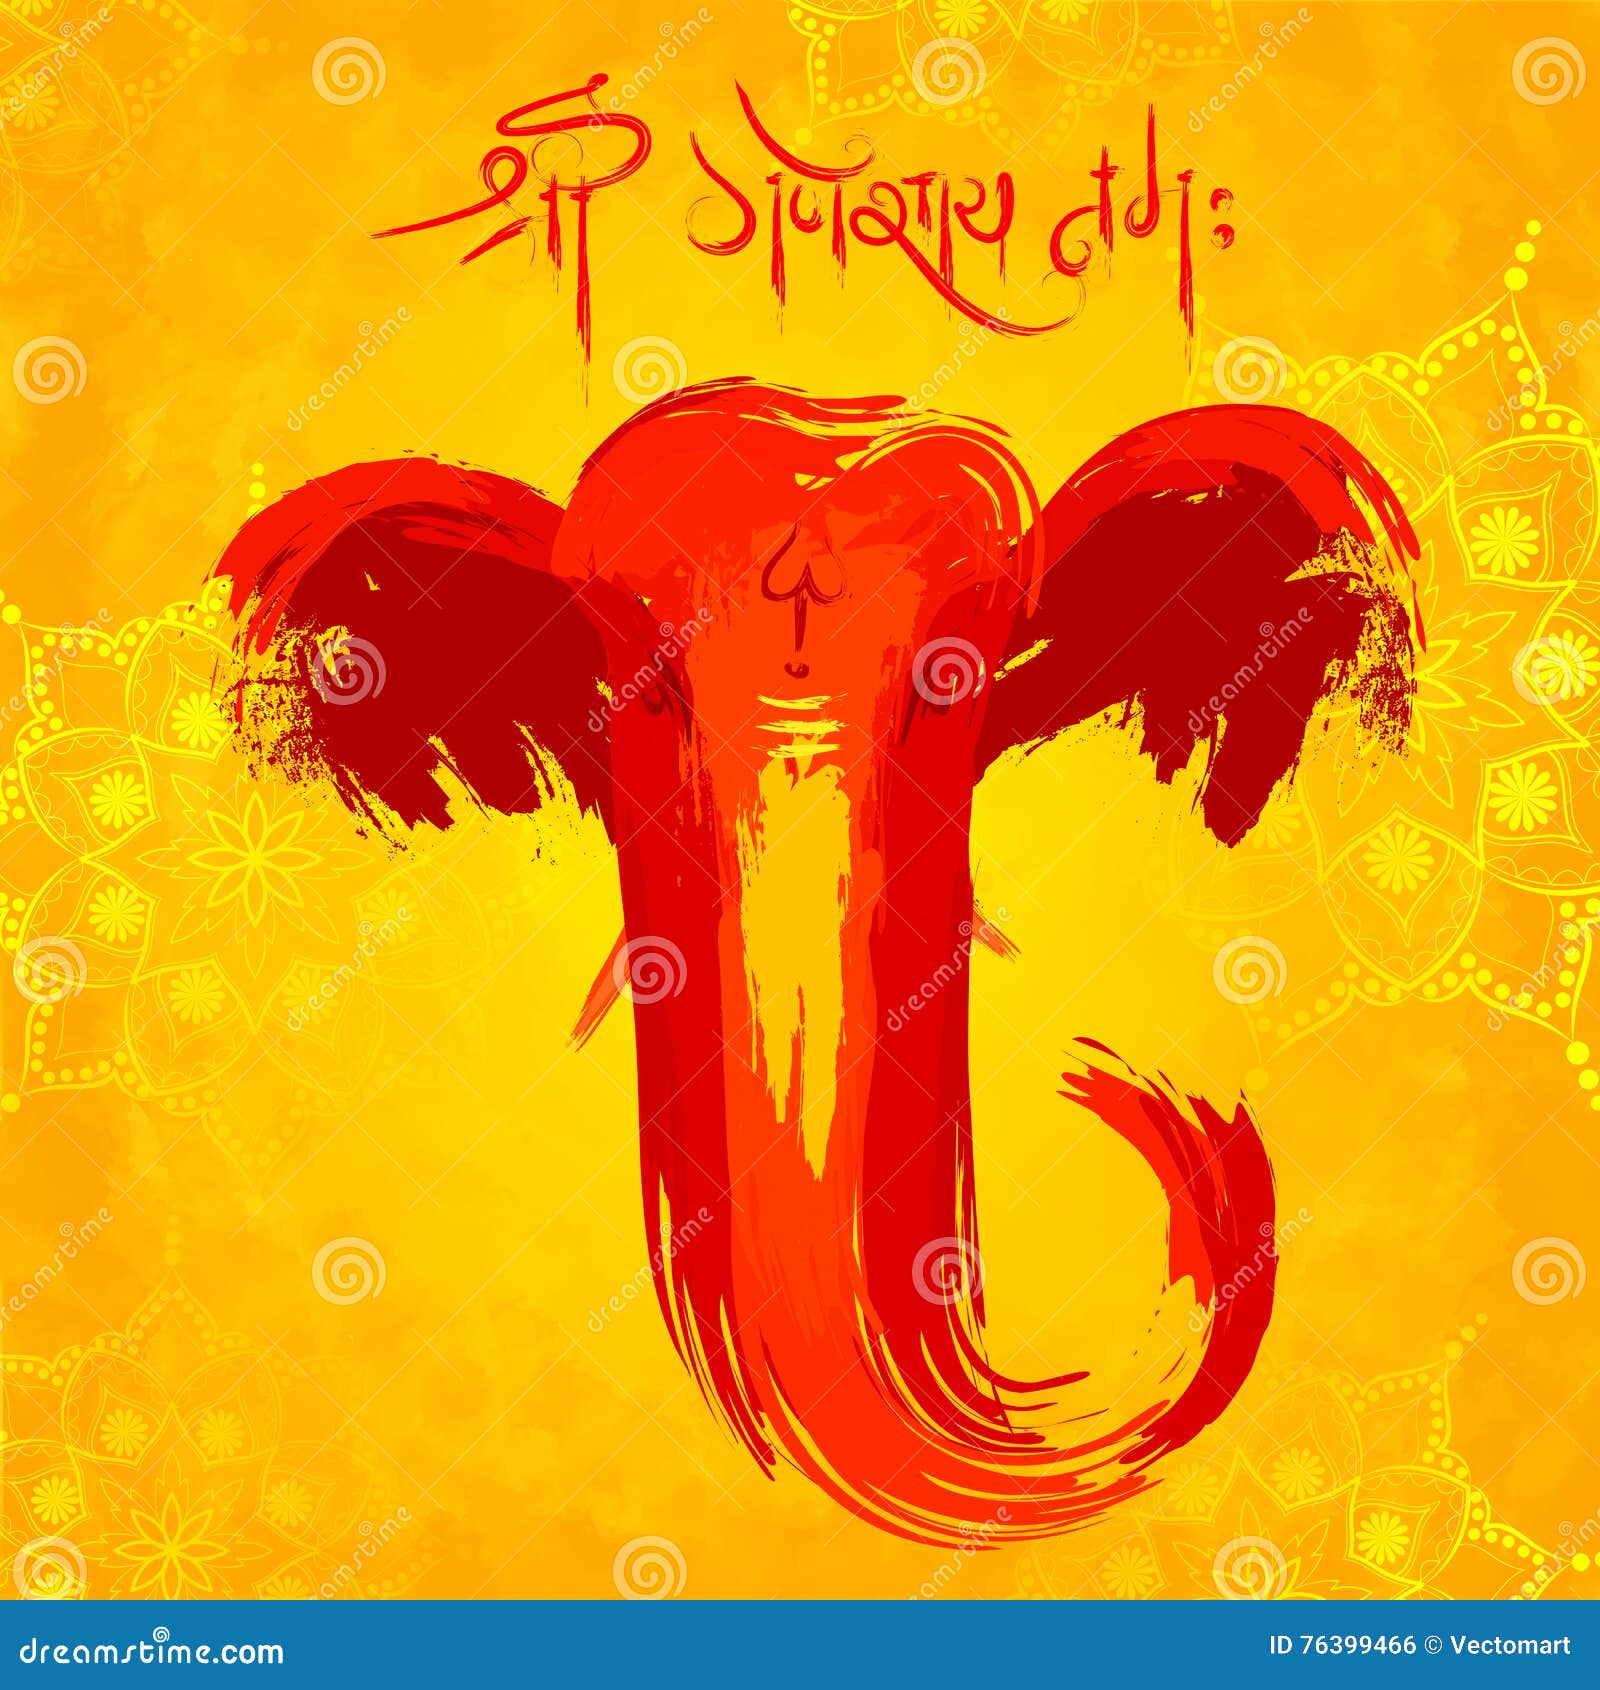 Lord Ganapati Background for Ganesh Chaturthi Stock Vector ...